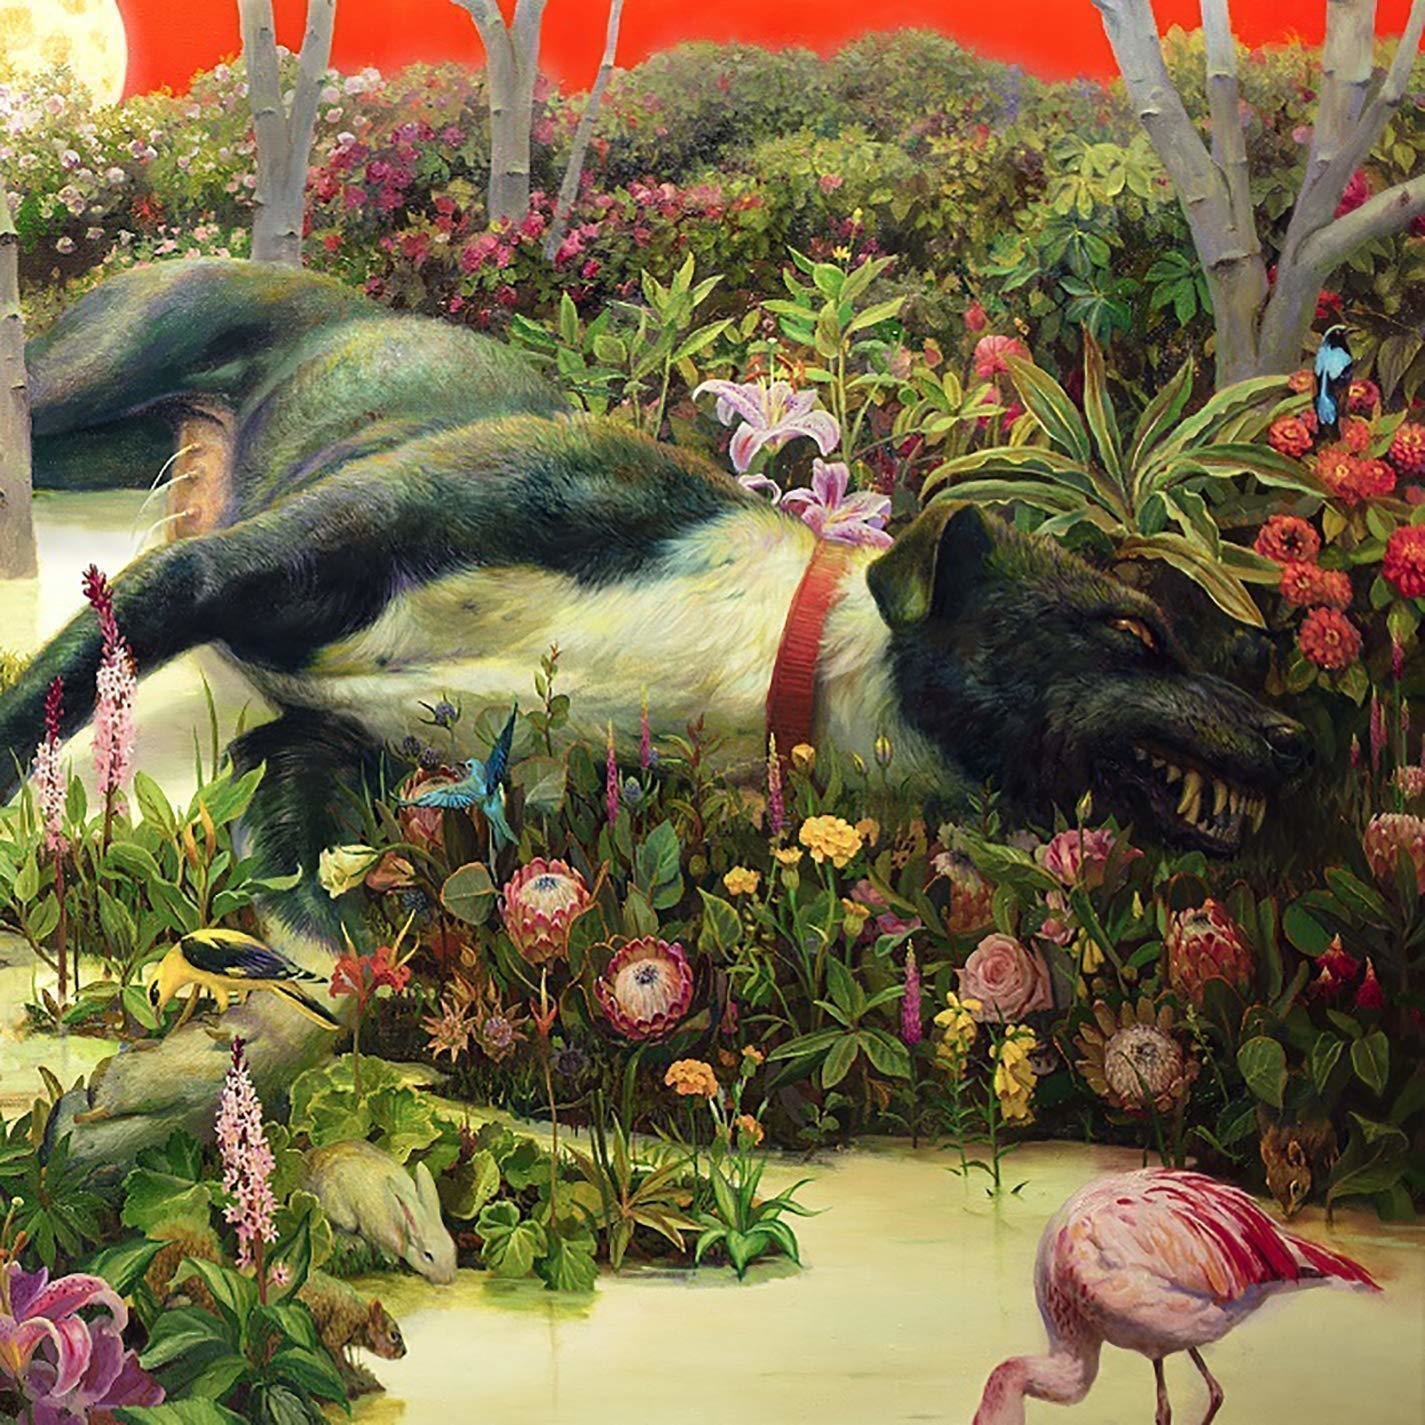 Rival Sons - Feral Roots (LP)